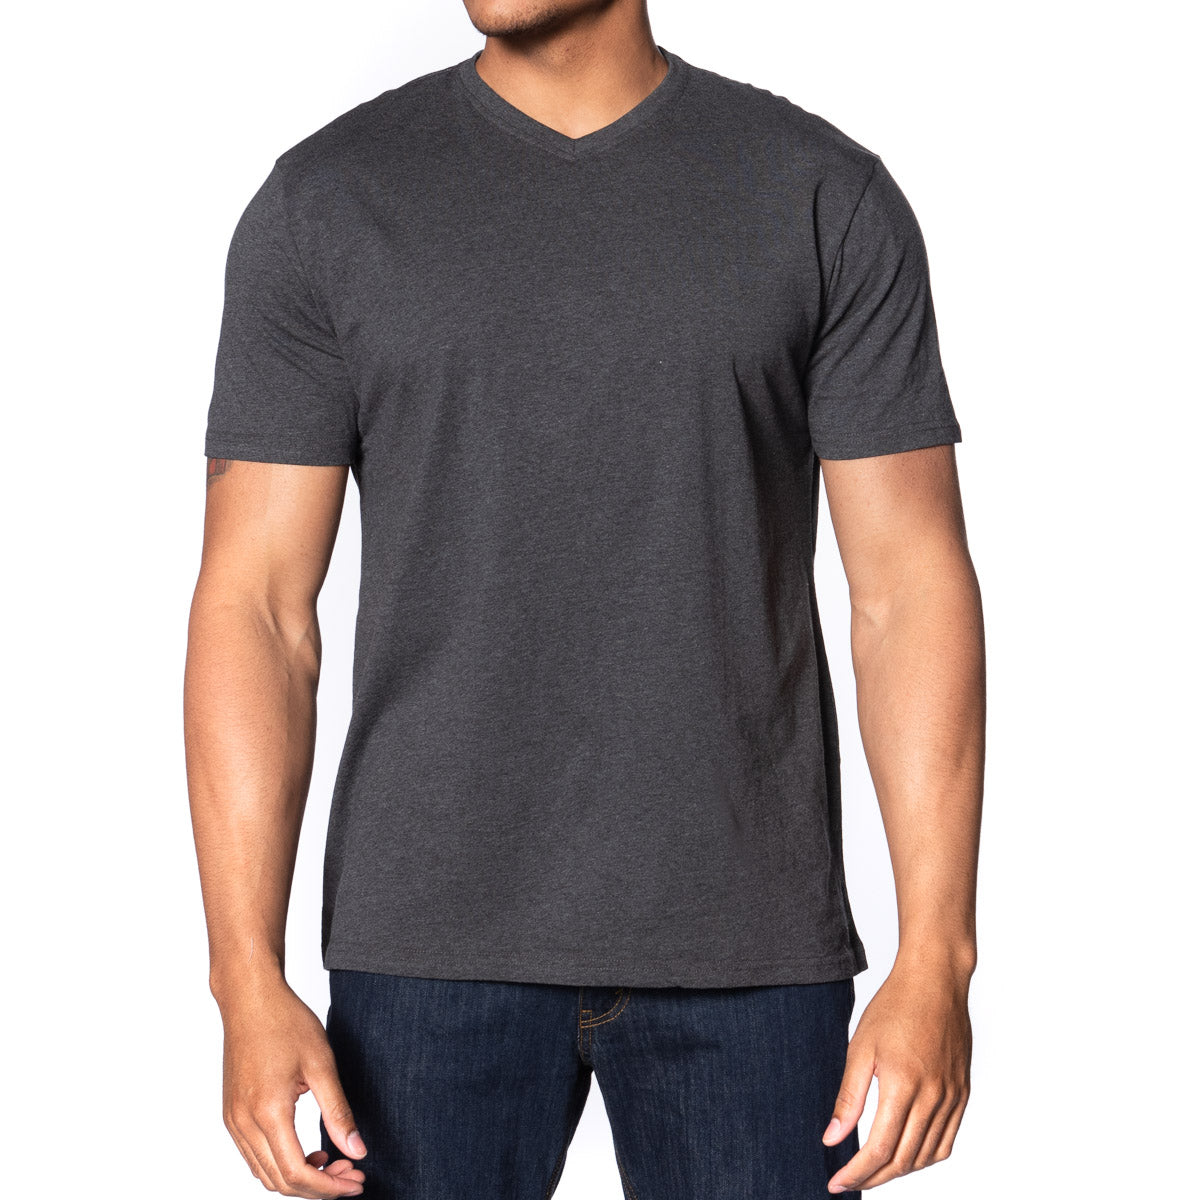 Fitted Vee Neck T-Shirt - Colors